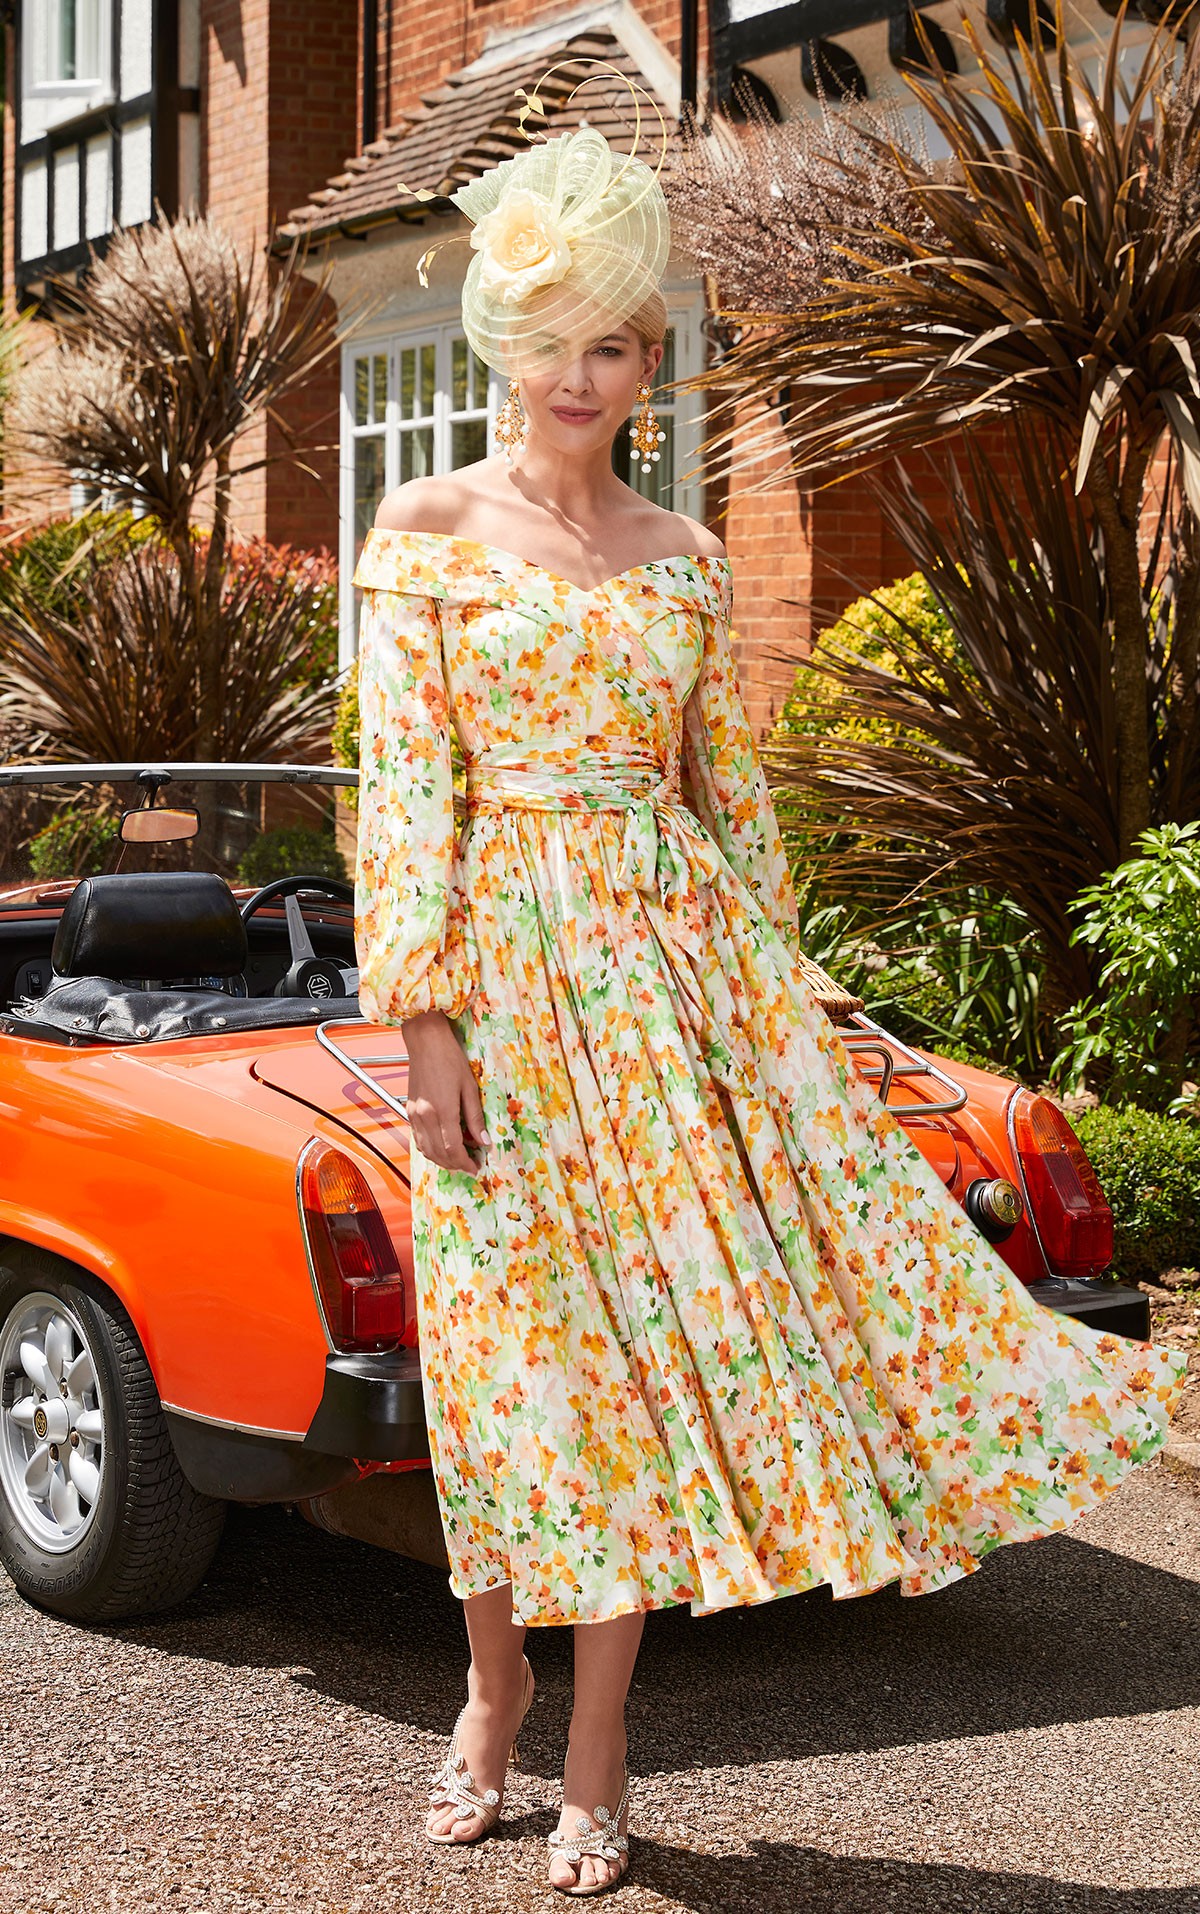 Veni Infantino - 29664A Size 6, 14 - Veni Infantino 29664 - Floral print  Chiffon dress with Off the shoulder neckline & sleeves Mother of the Bride/groom dresses now on Sale at Occasions at Blessings Loyal Parade, Mill Rise, Westdene, Brighton. BN1 5GG T: 01273 505766 E: info@blessingsbridal.co.uk